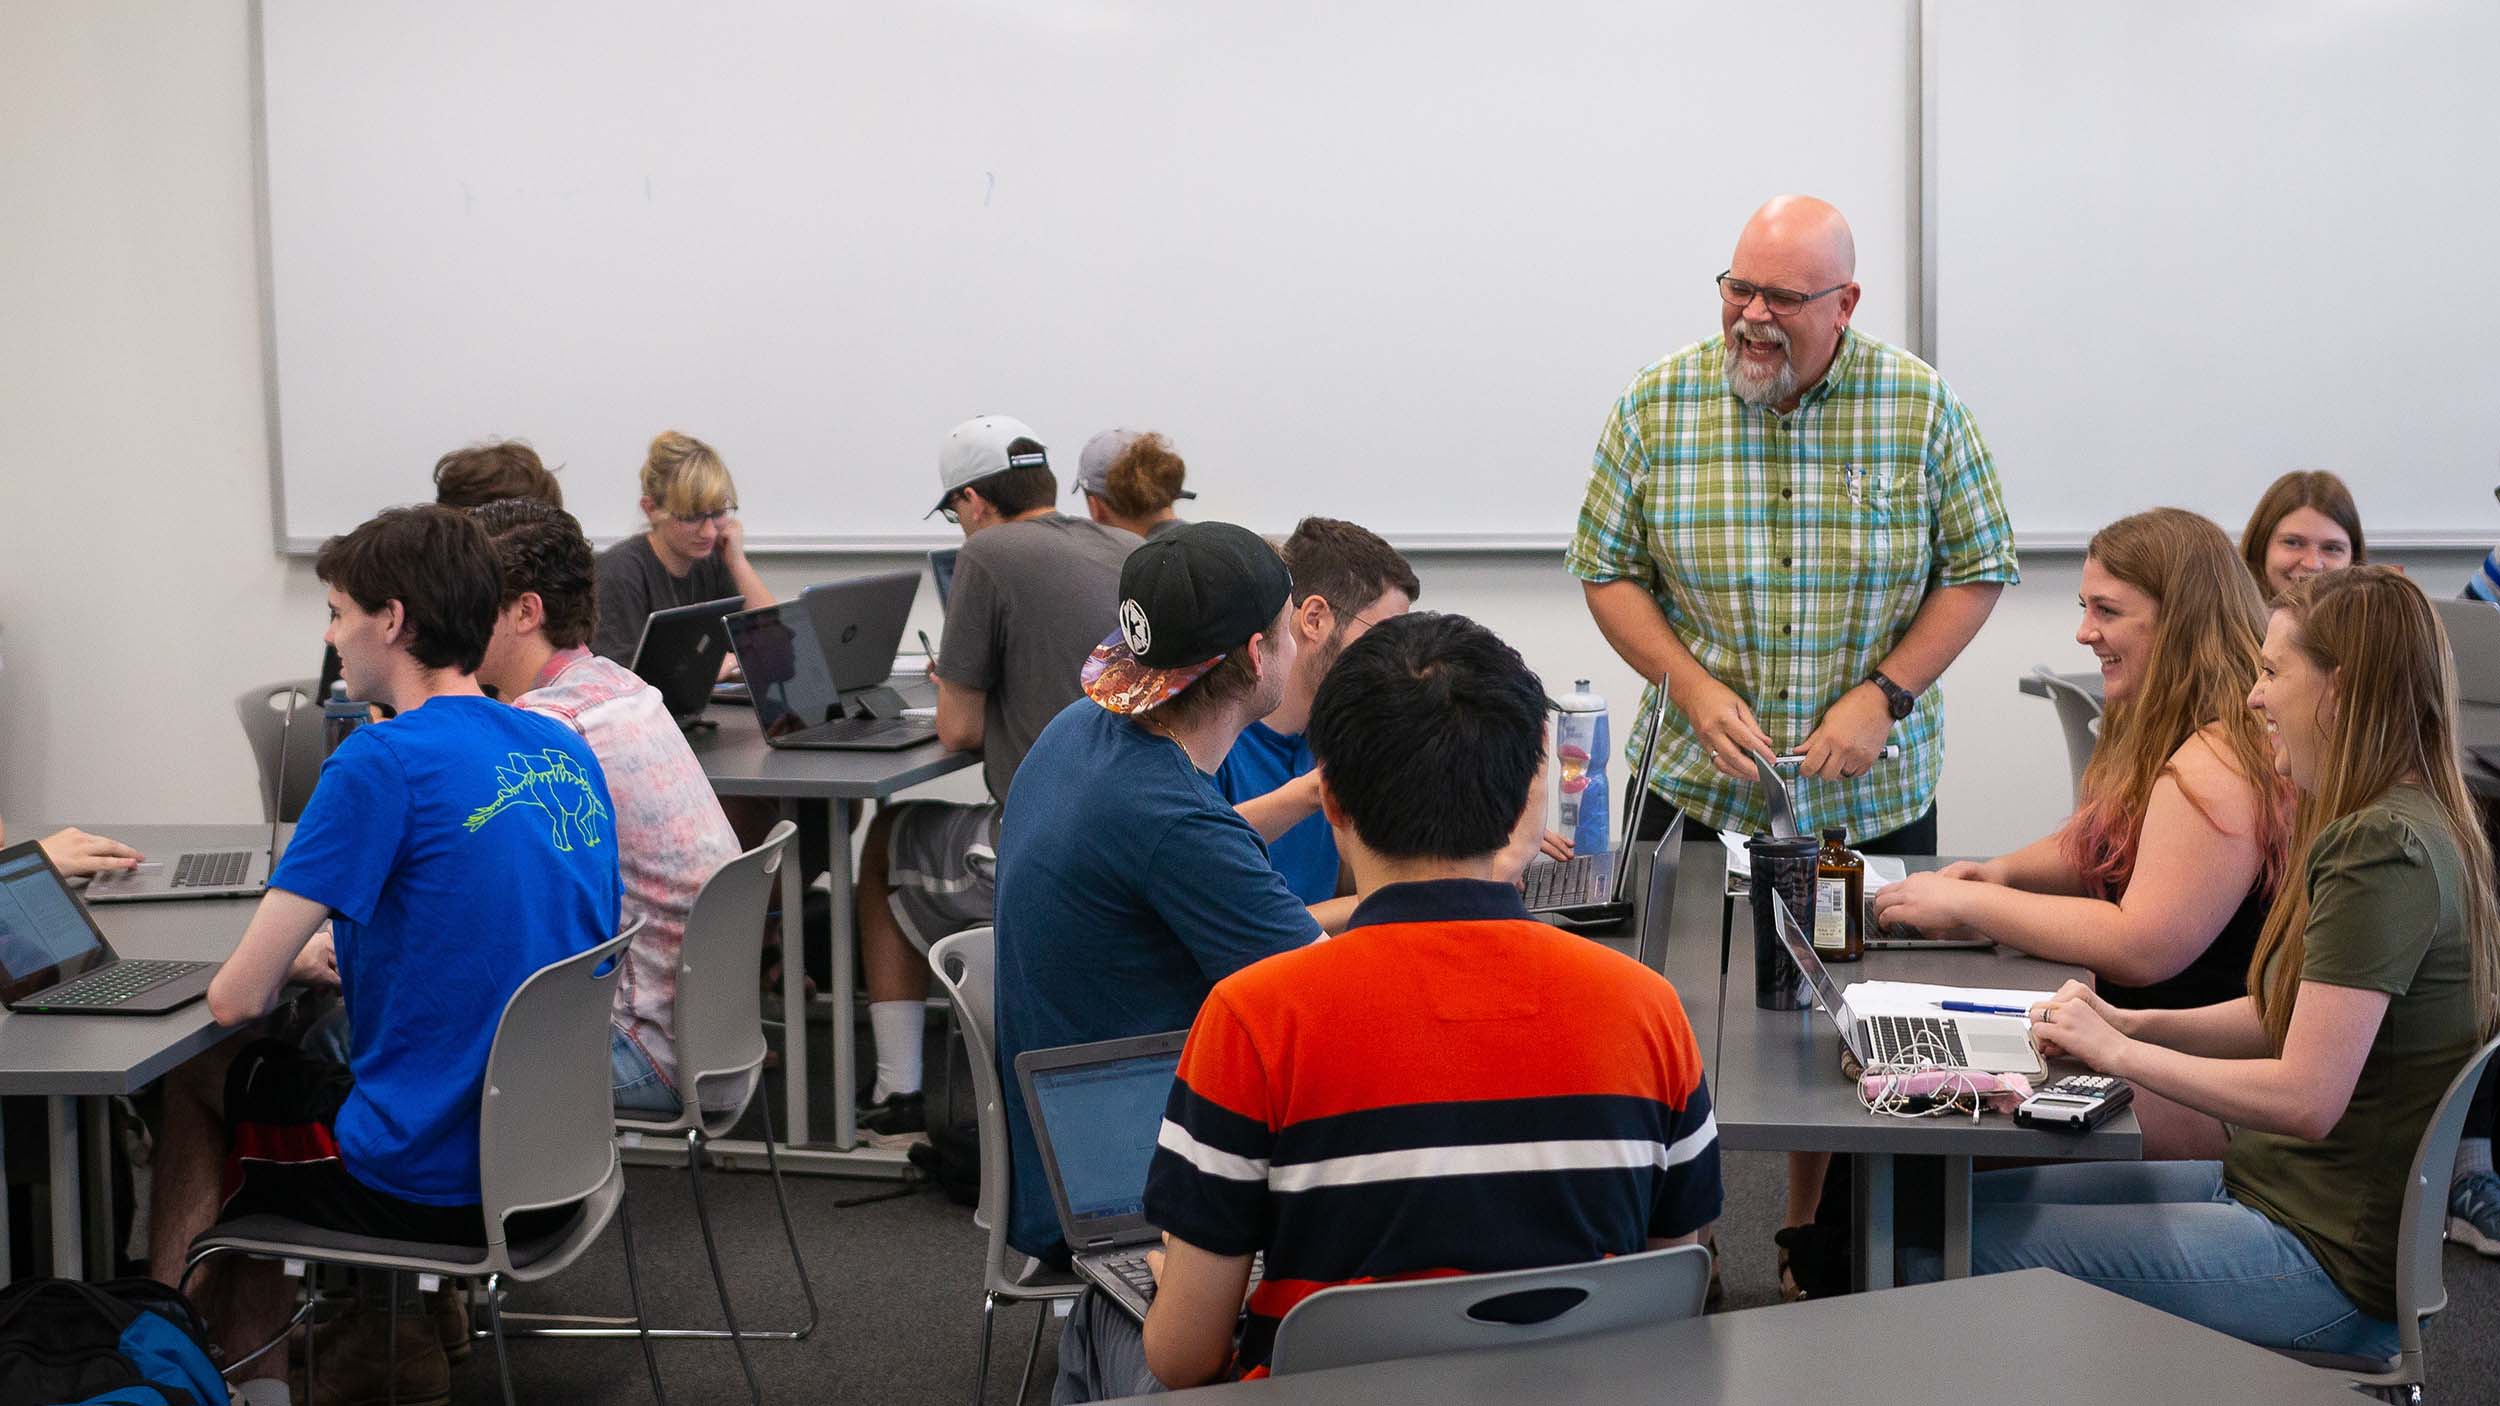 Professor laughing with students in a classroom